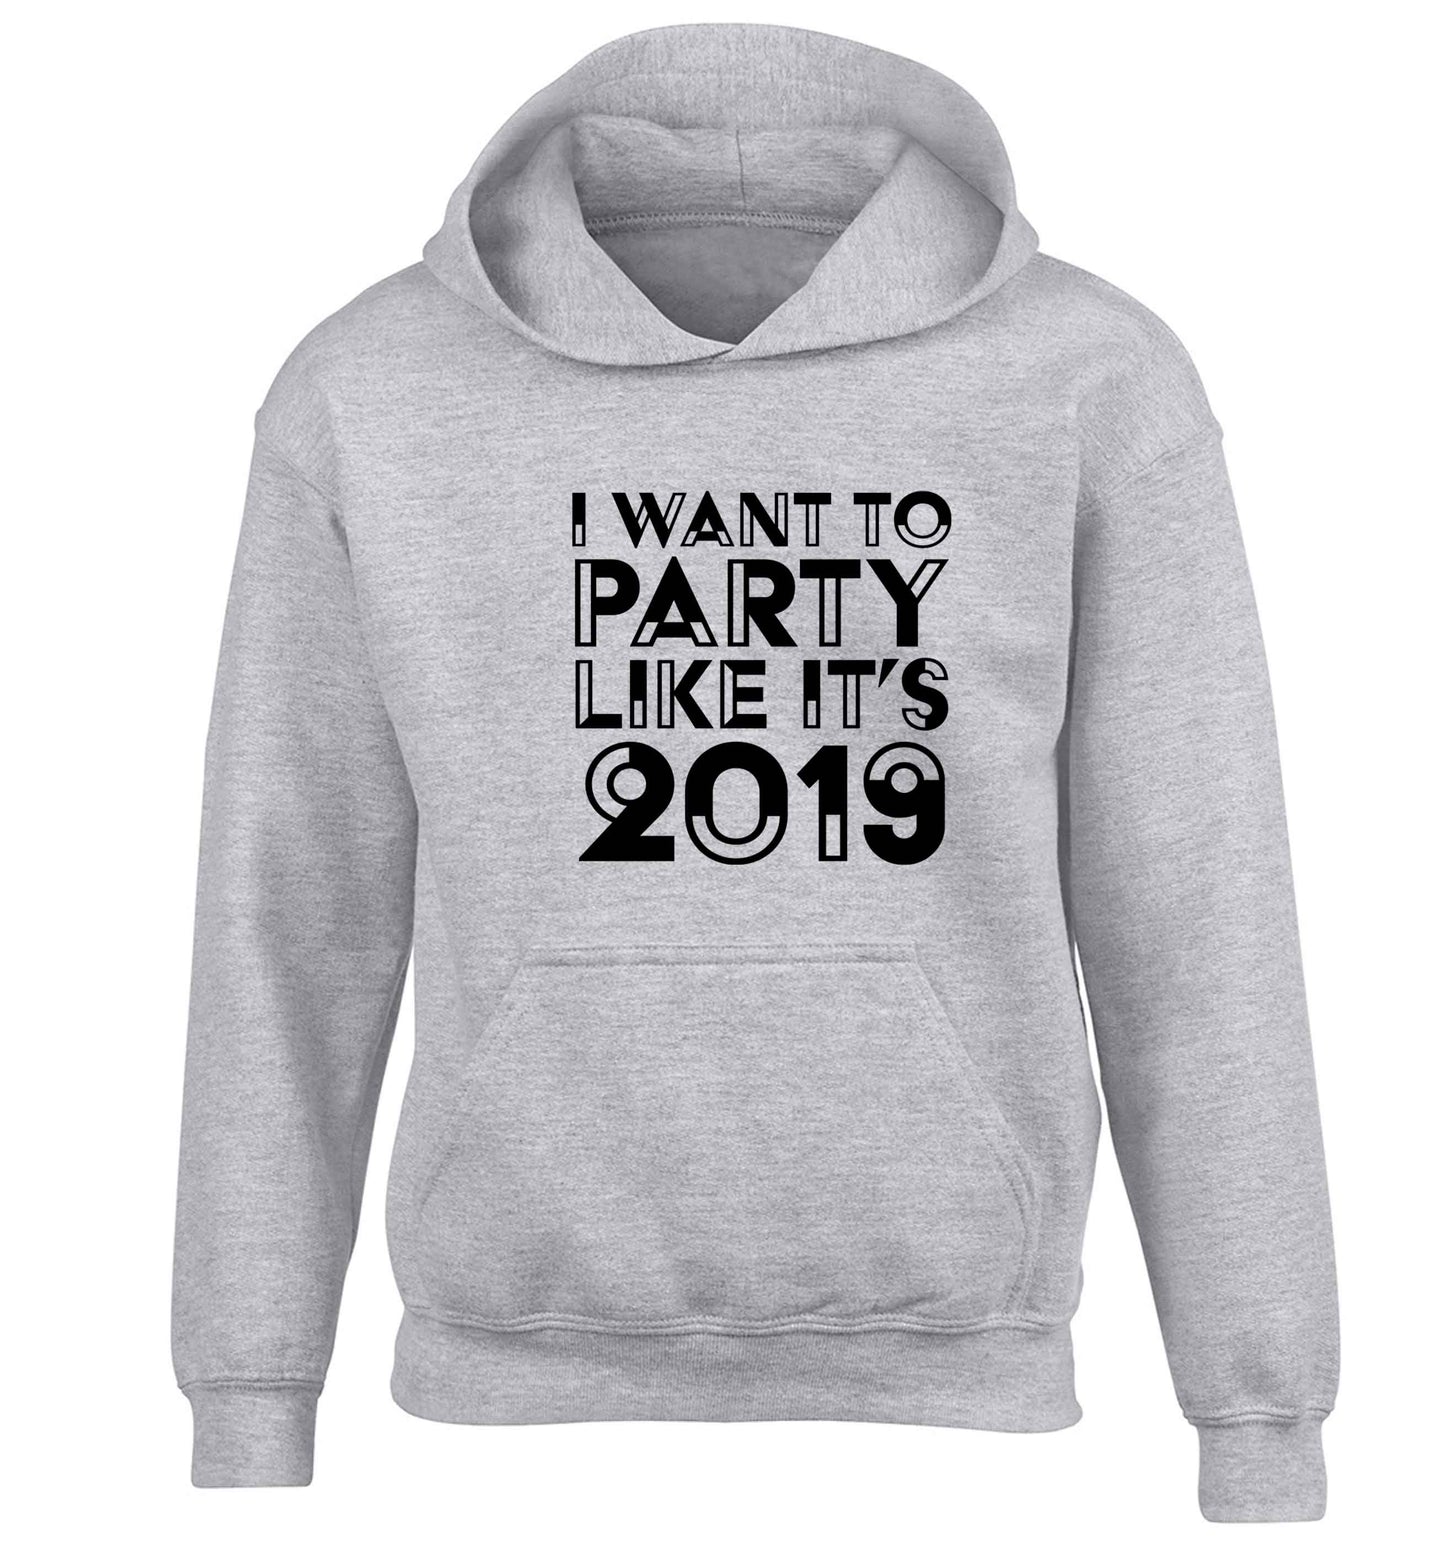 I want to party like it's 2019 children's grey hoodie 12-13 Years